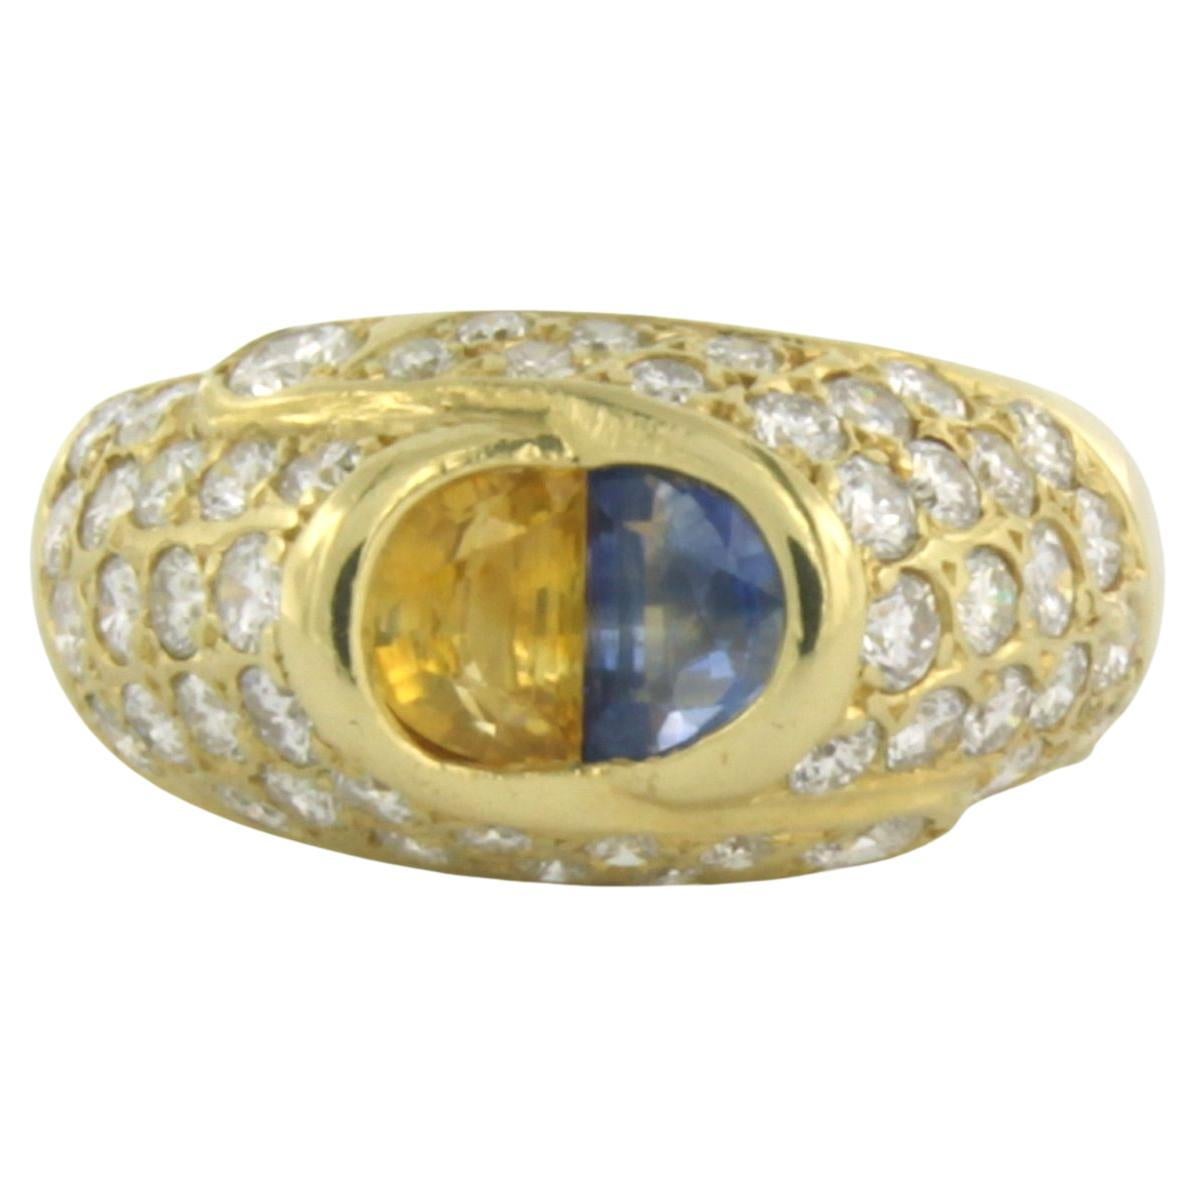 Ring with yellow and blue sapphire, and diamond, 18k gold